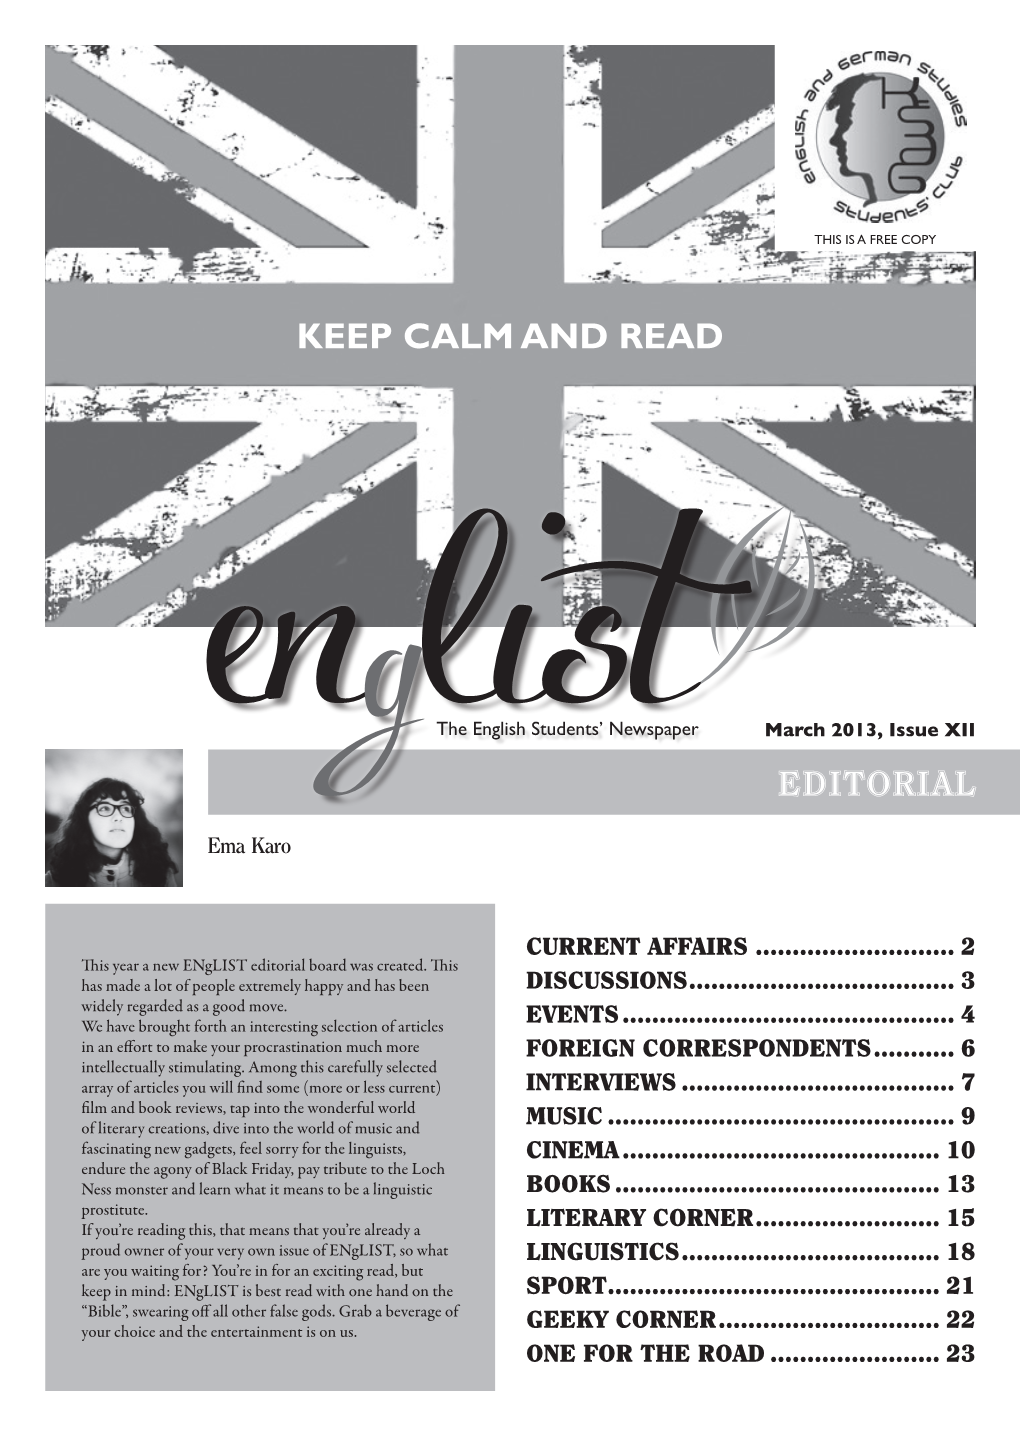 Keep Calm and Read Editorial